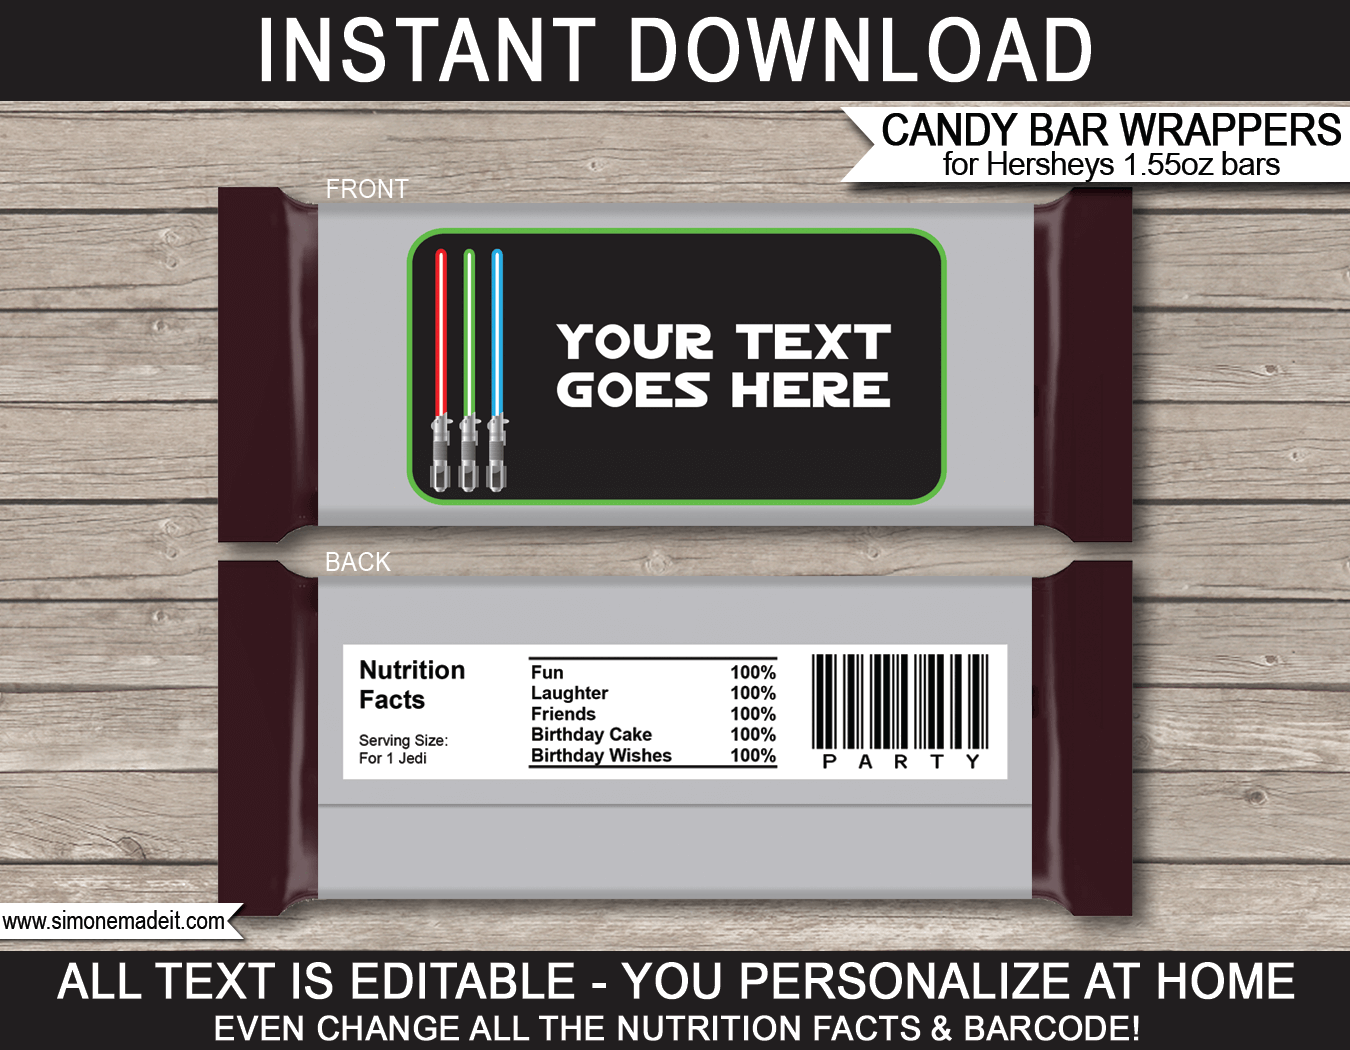 Printable Star Wars Hershey Candy Bar Wrappers Template | Birthday Party Favors | Personalized Candy Bars | DIY Editable Text | INSTANT DOWNLOAD $3.00 via simonemadeit.com